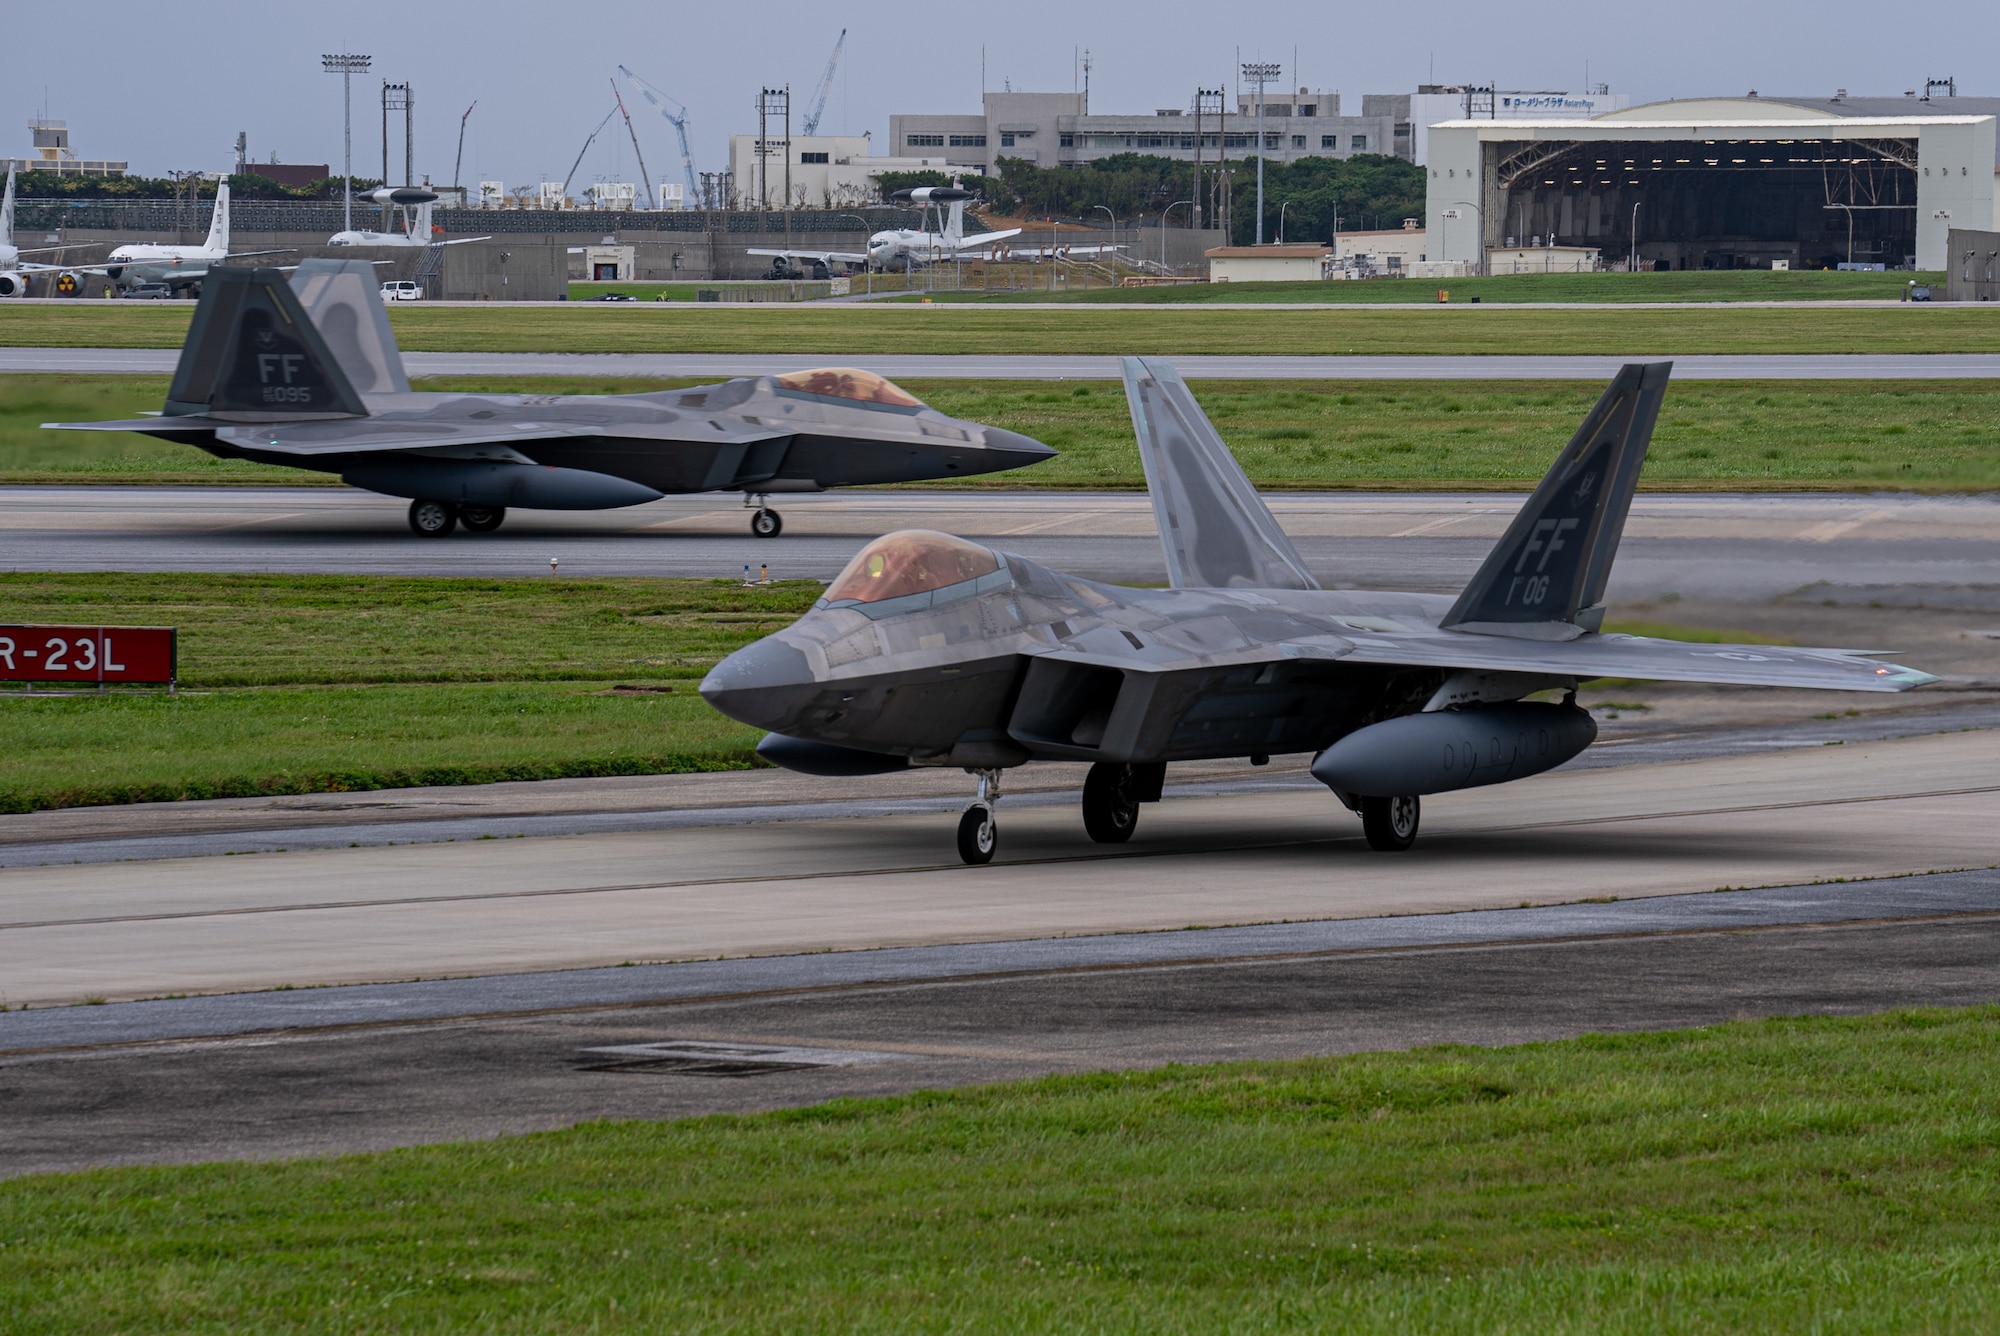 U.S. F-22A Raptors assigned to the 27th Fighter Squadron taxi away from the runway at Kadena Air Base, Japan, April 20, 2024. As the 18th Wing continues the phased return of Kadena’s fleet of F-15C/D Eagles, the Department of Defense will maintain a steady-state fighter presence in the Indo-Pacific region by temporarily deploying aircraft to maintain deterrence capabilities and added flexibility in a dynamic theater. (U.S. Air Force photo by Senior Airman Cedrique Oldaker)